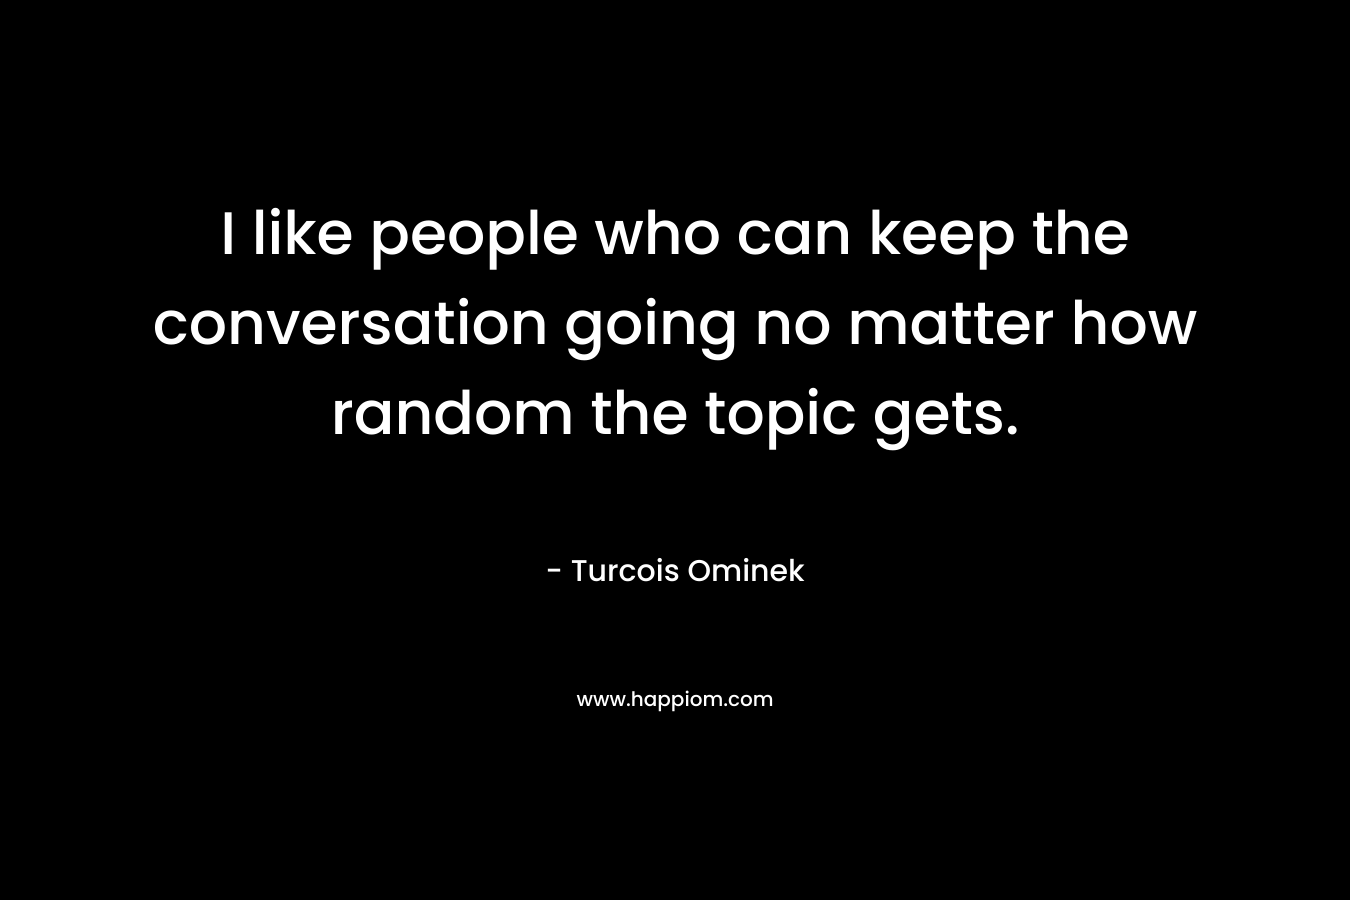 I like people who can keep the conversation going no matter how random the topic gets. – Turcois Ominek